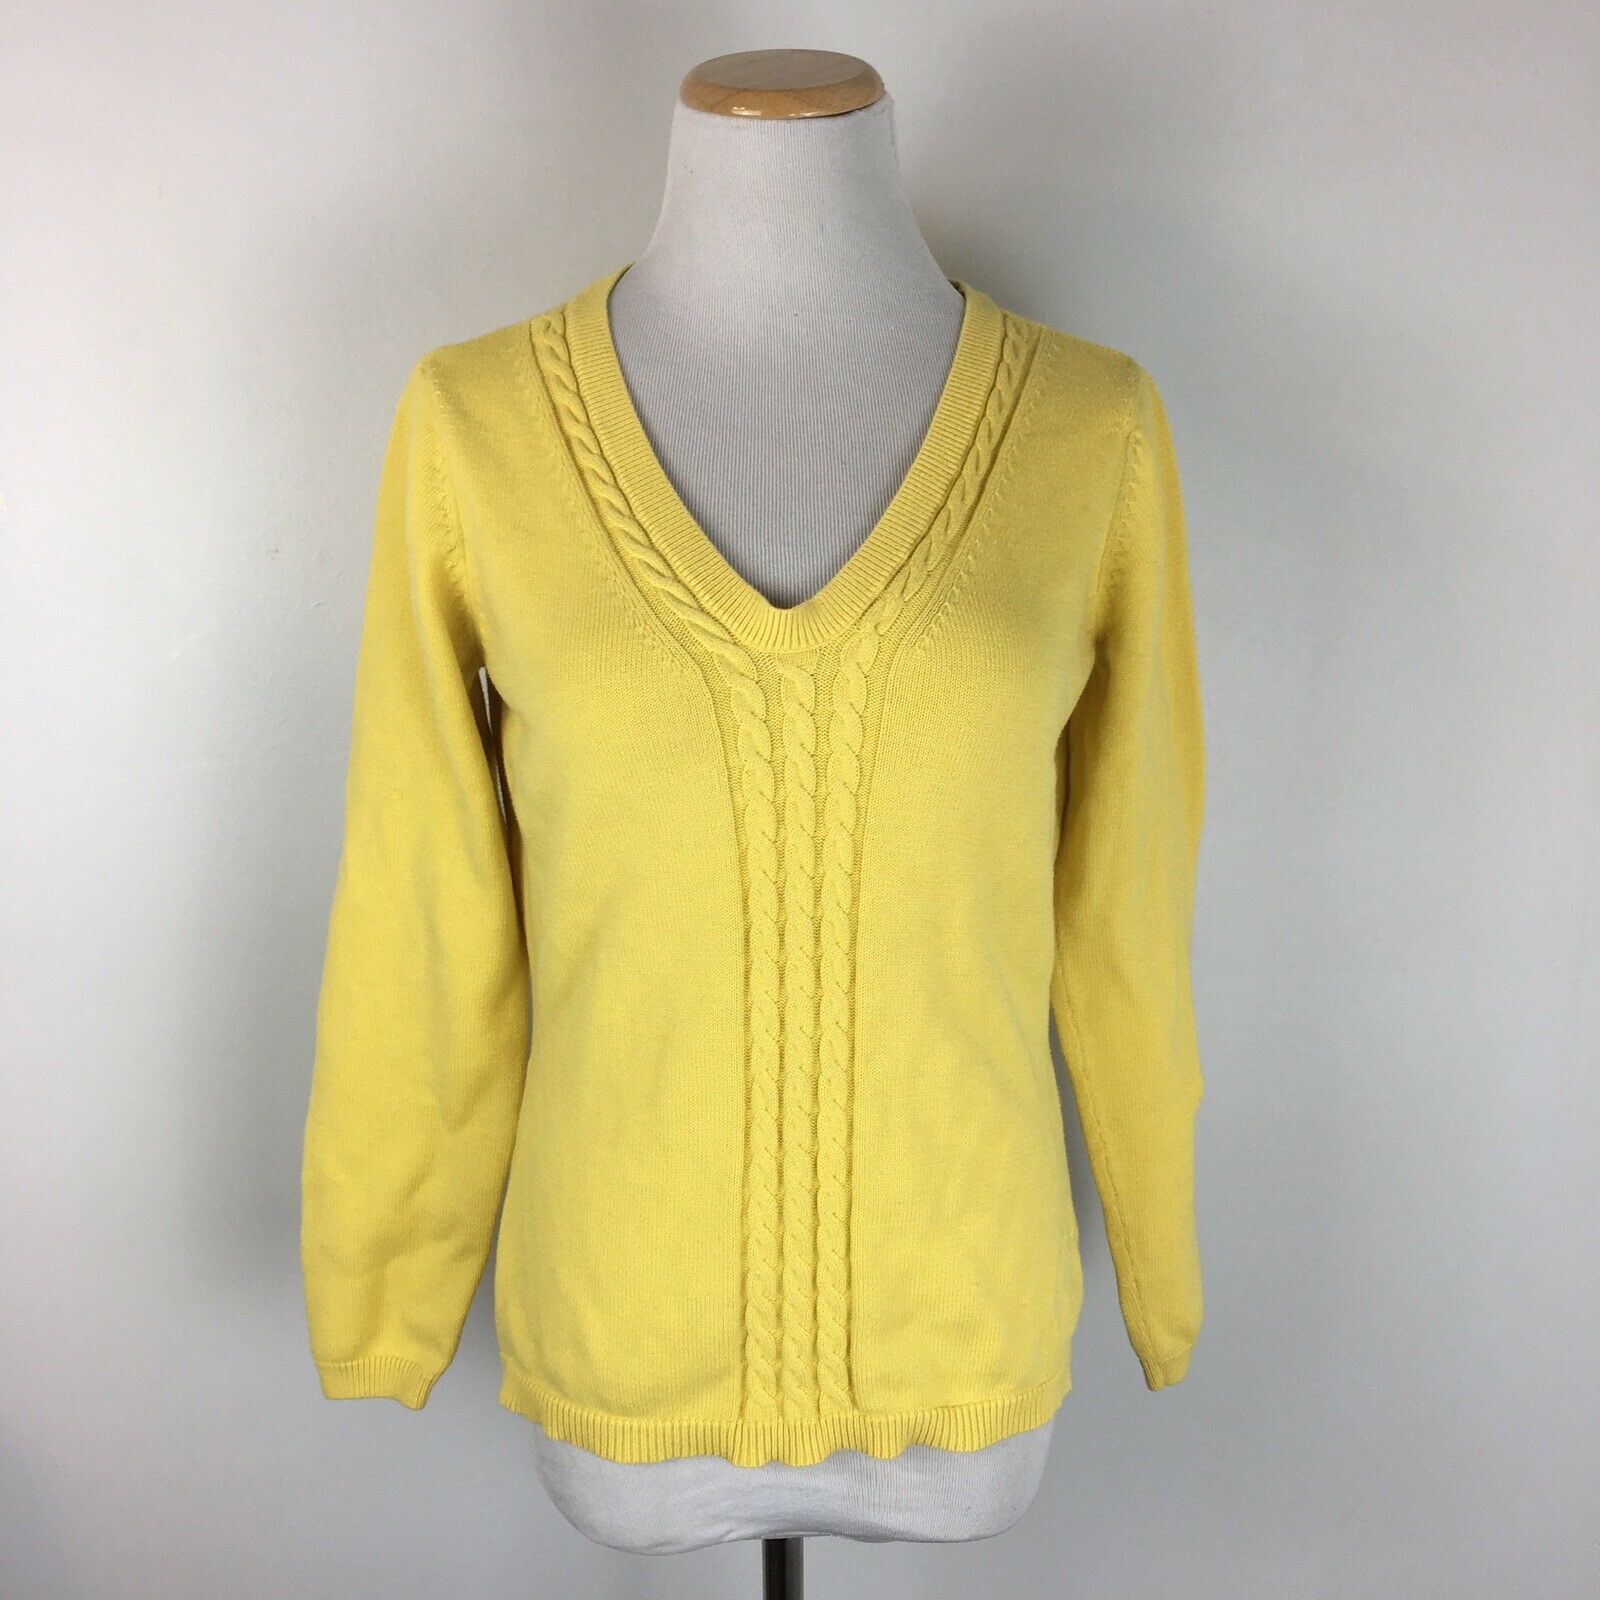 Talbots Women's Bright Yellow Pullover Cable Knit Pima Cotton Sweater ...